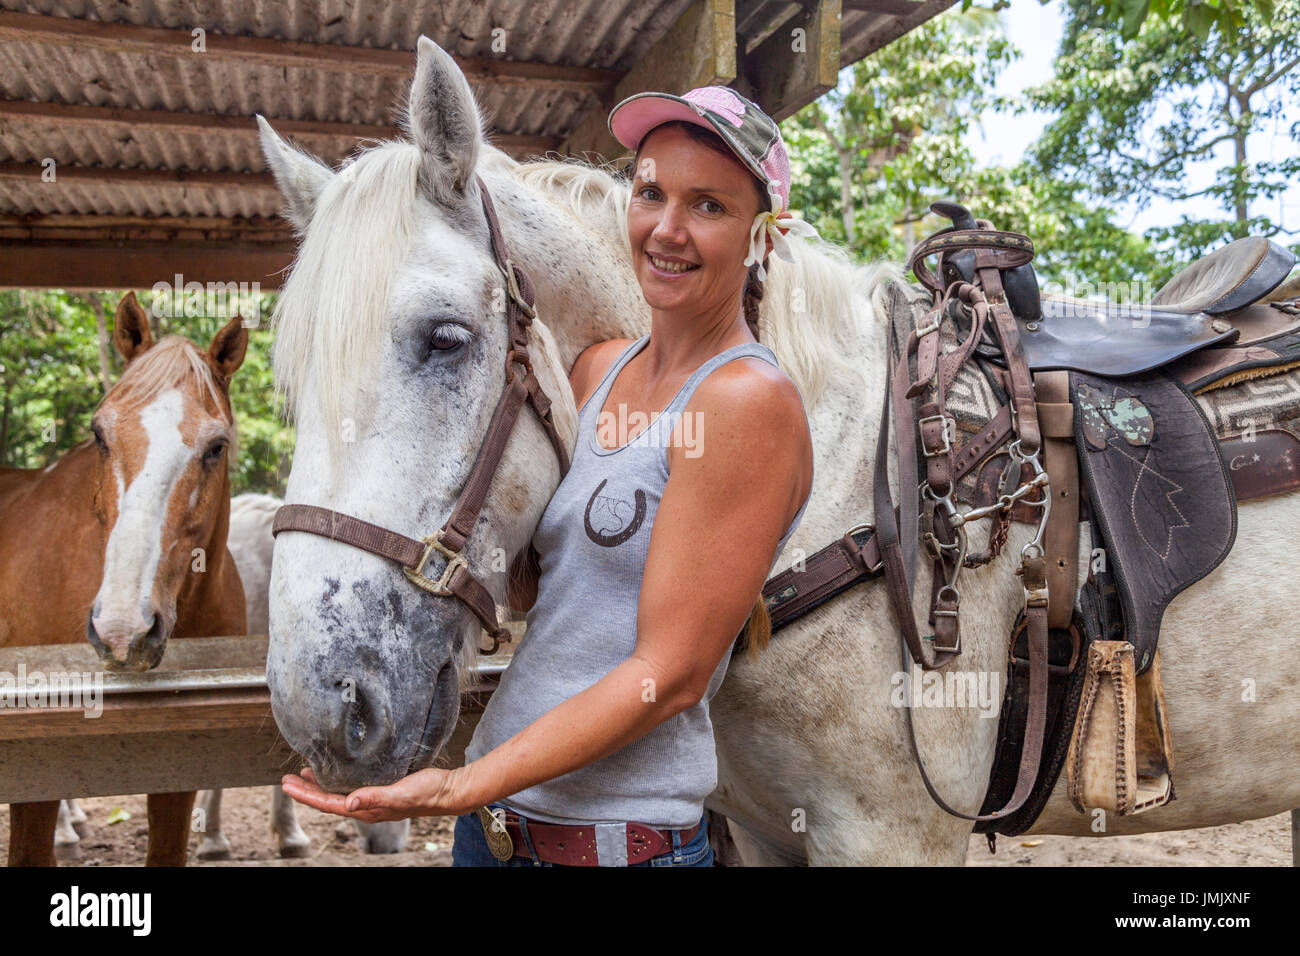 Woman and horses at Na'alapa Stables in Waipio Valley on the Big Island of Hawaii Stock Photo